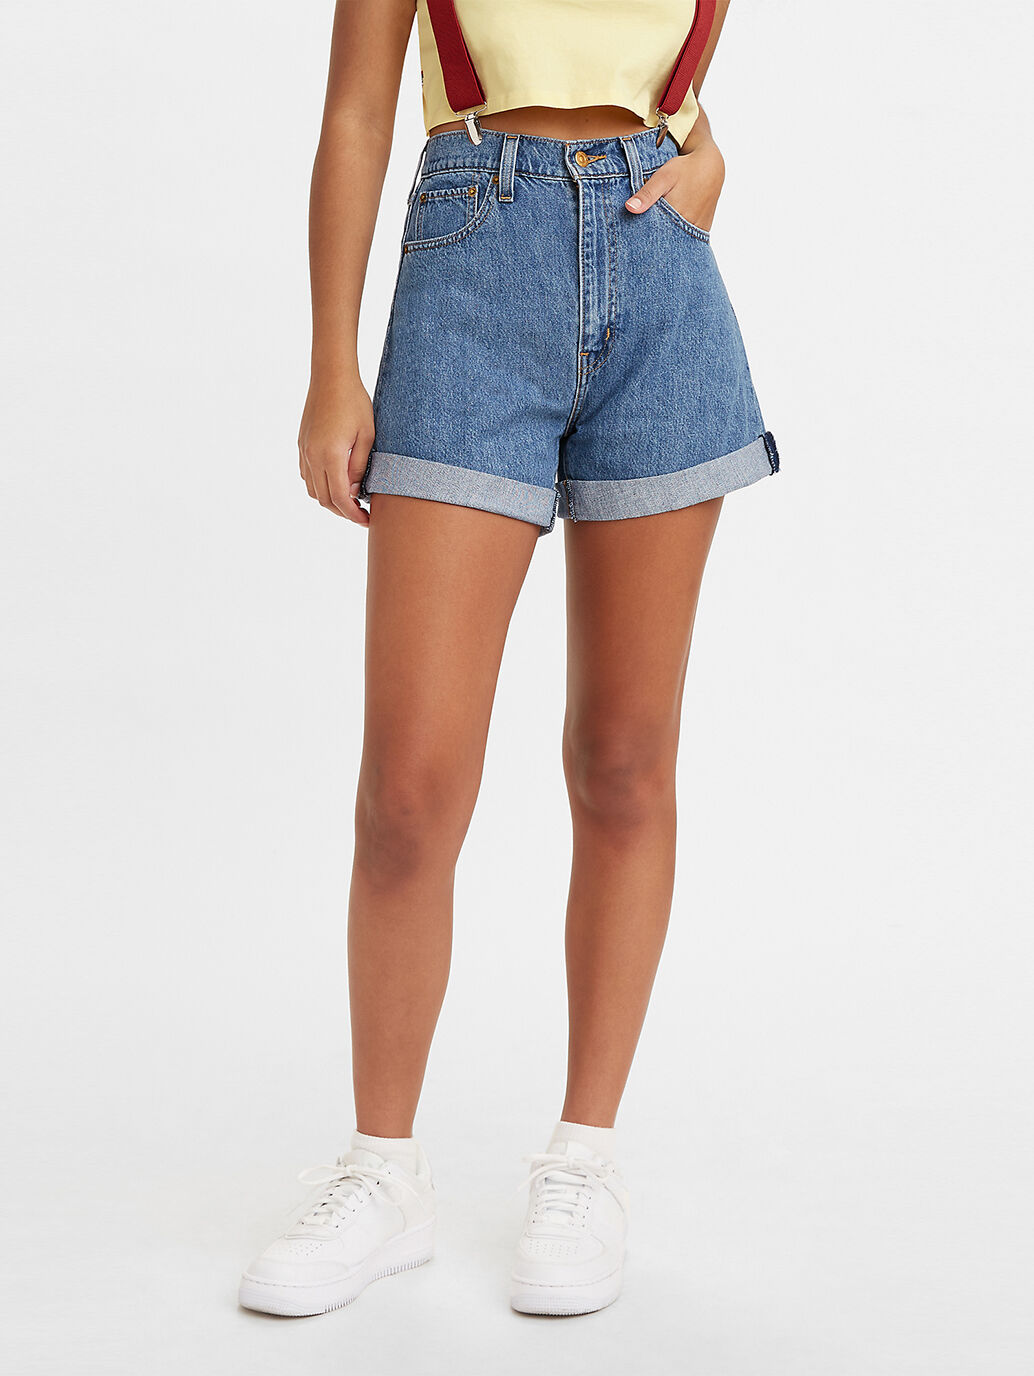 where to buy levi shorts